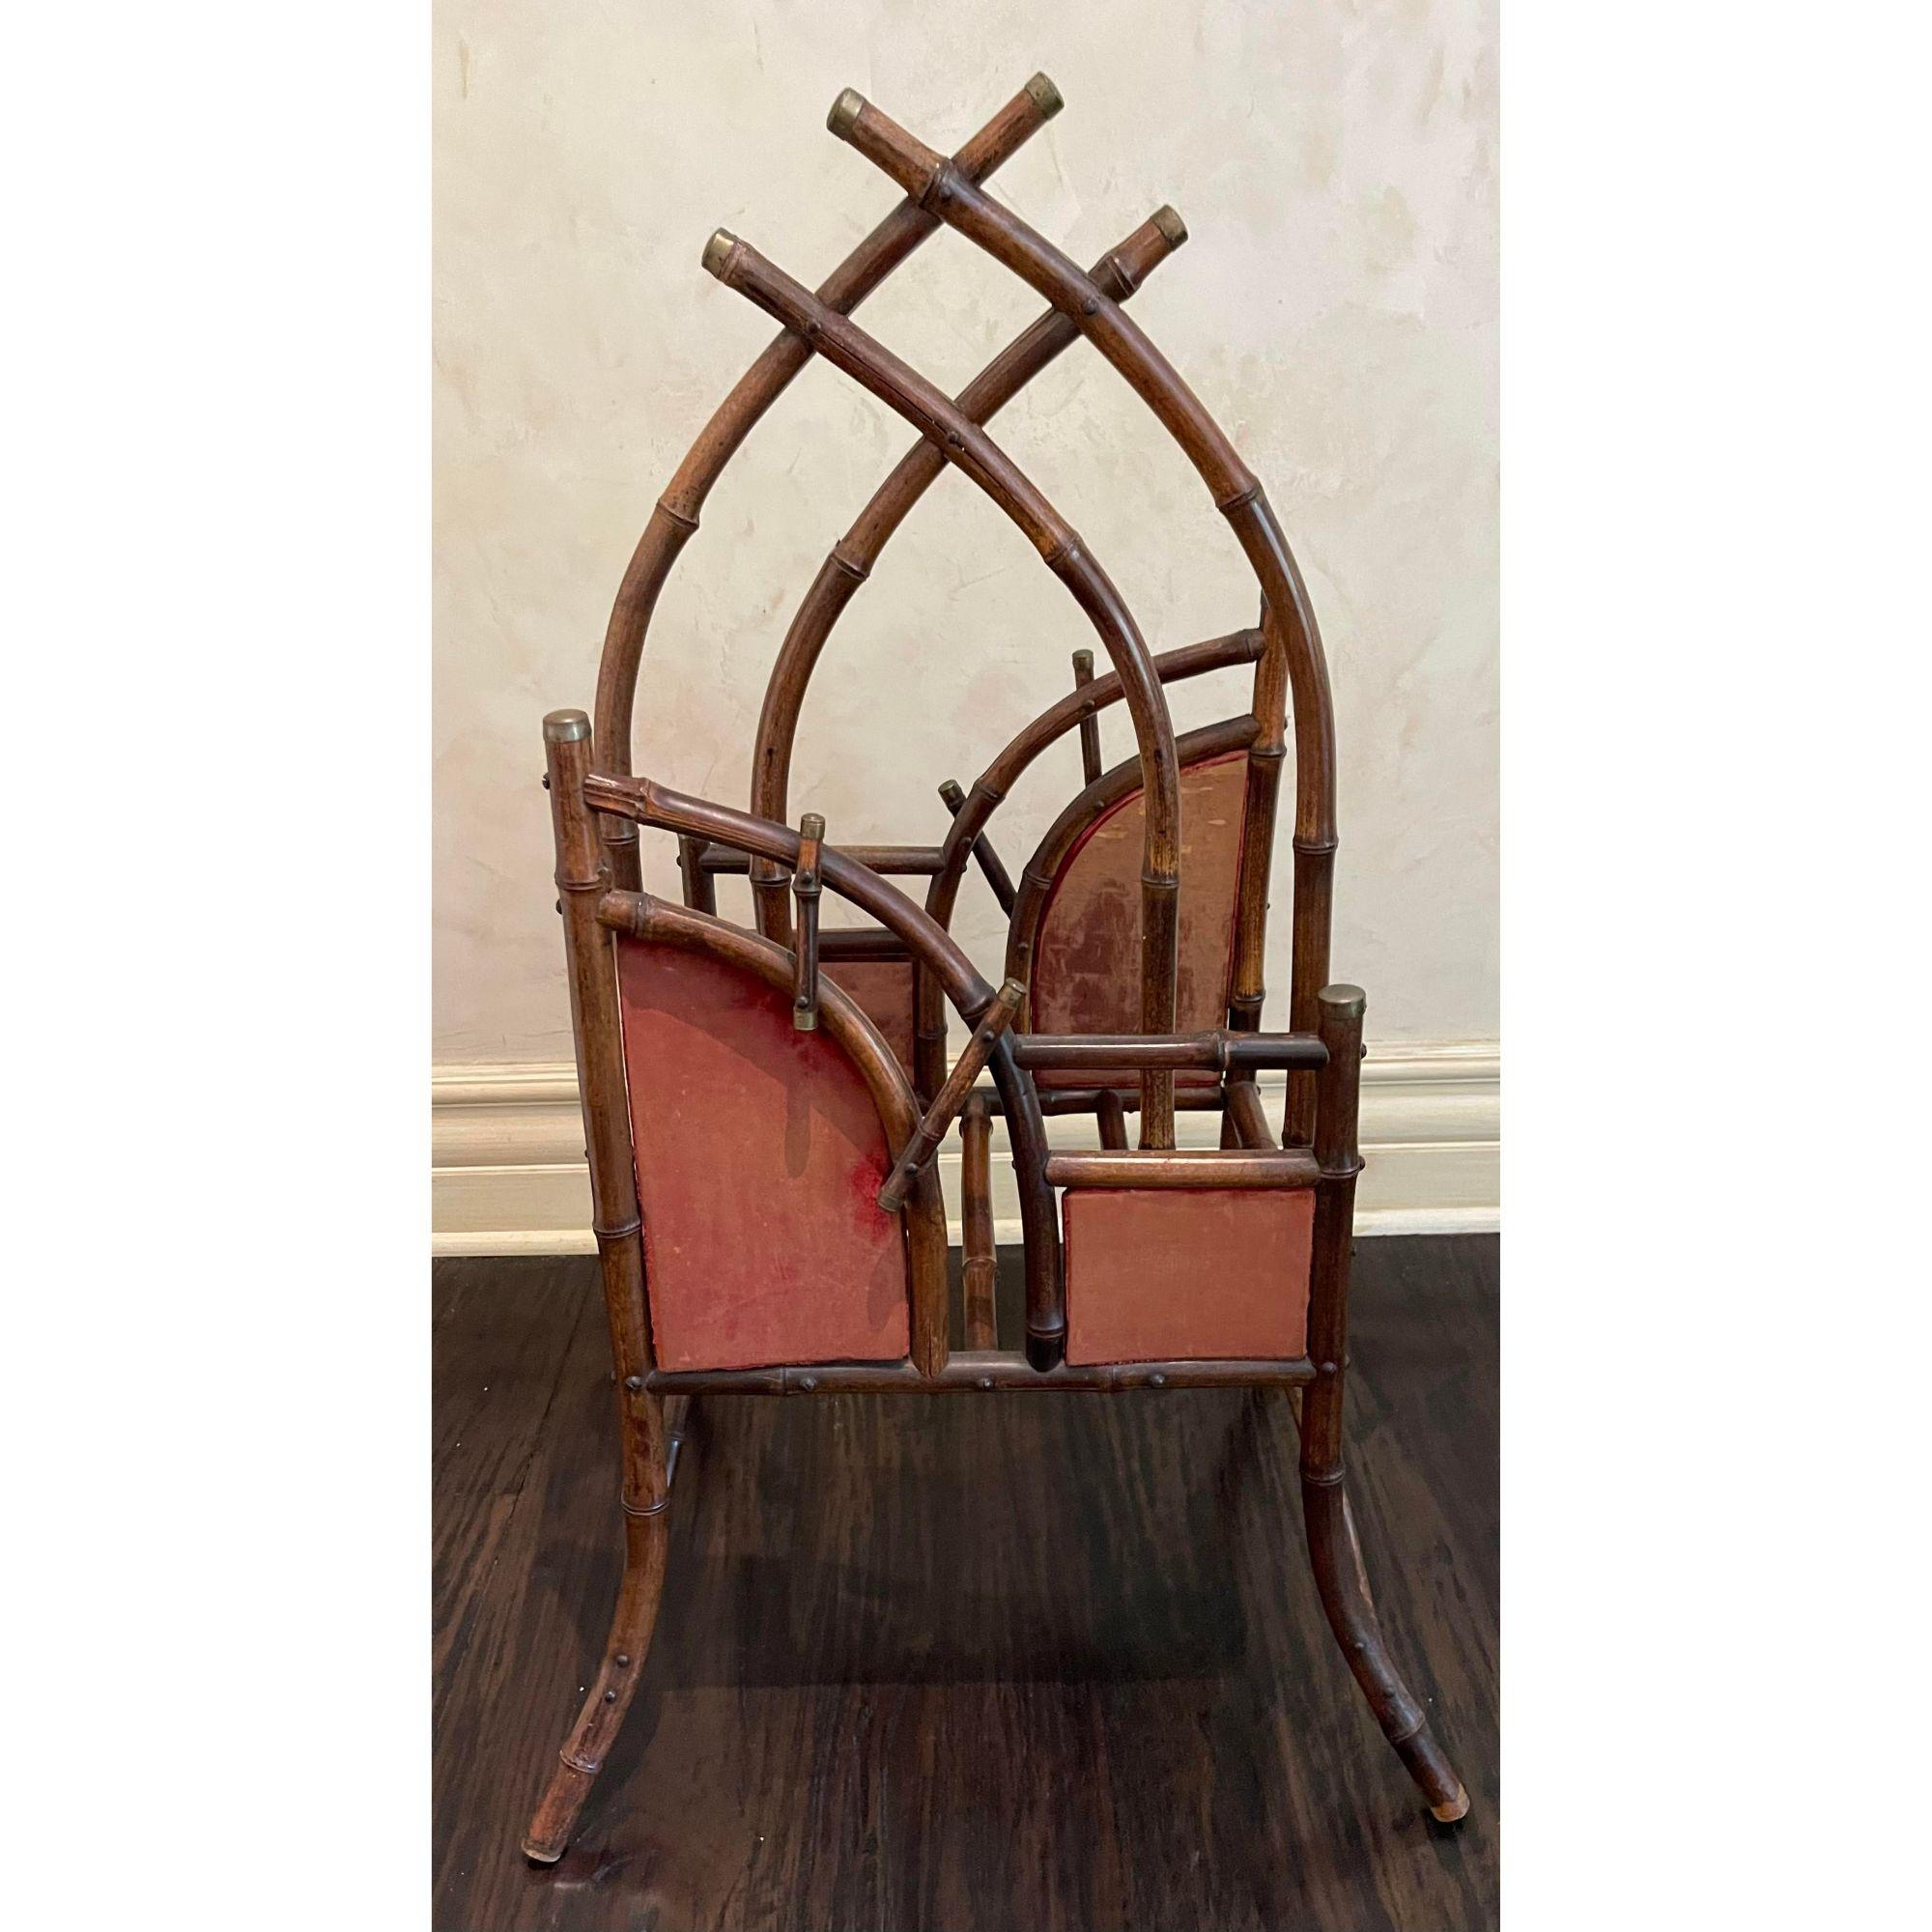 Antique Regency bamboo magazine rack. It has an unusual form and a beautiful patina.

Additional information: 
Materials: bamboo
Color: brown 
Period: 19th century
Styles: Regency
Item Type: vintage, antique or pre-owned
Dimensions: 21